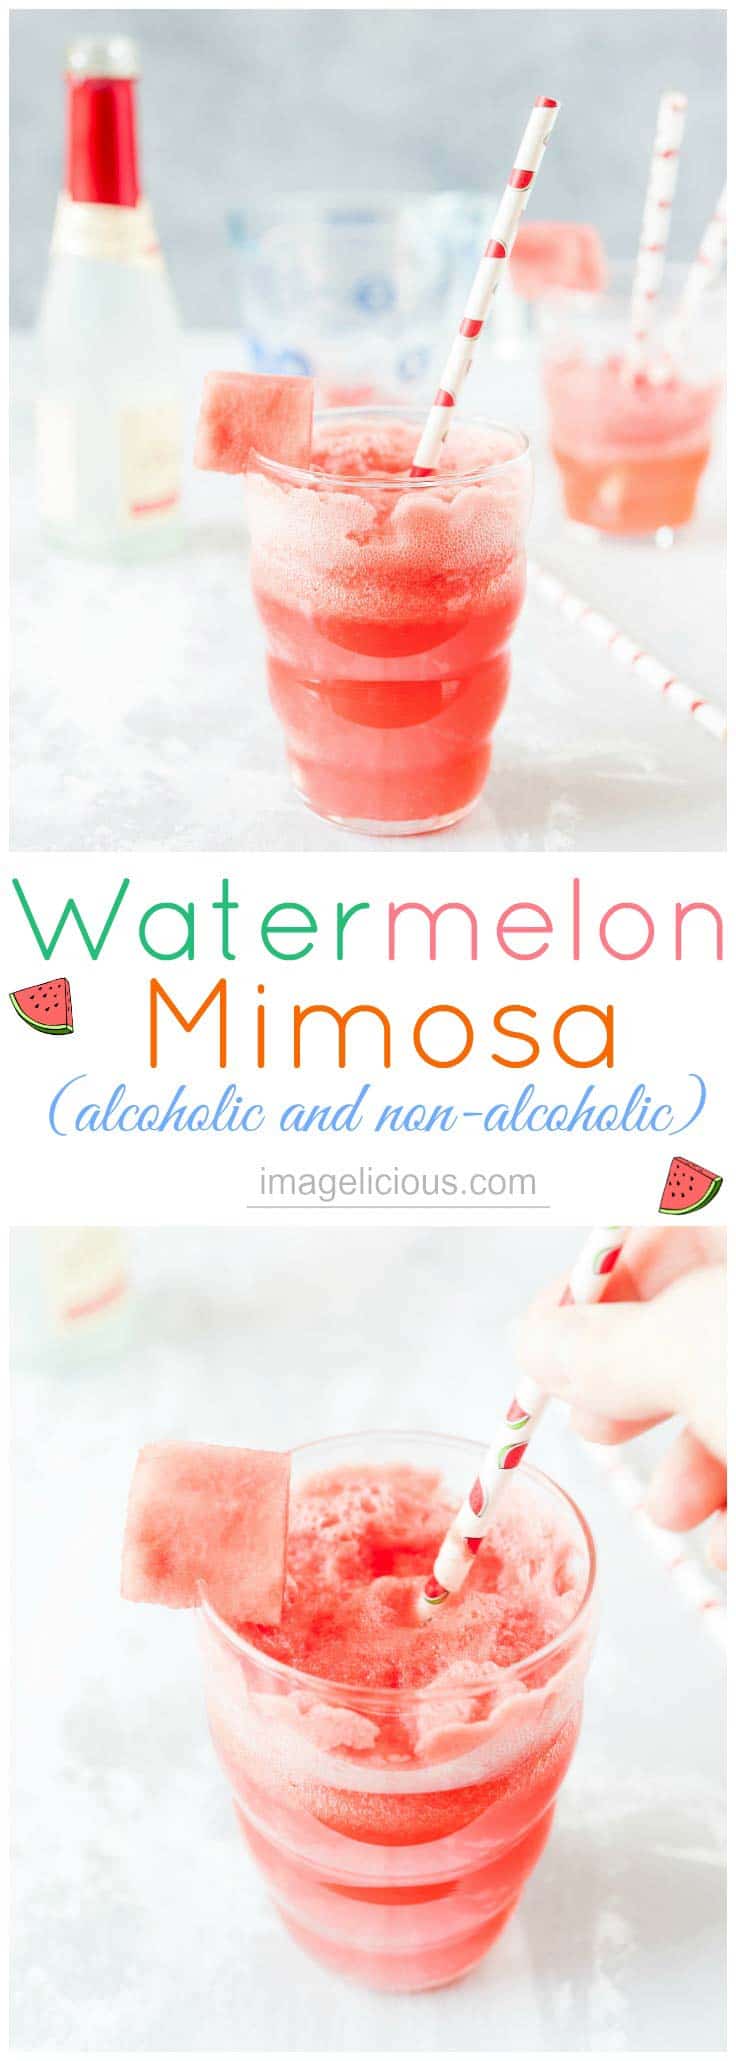 Refreshing Watermelon Mimosa is a perfect summer cocktail made with fresh sweet watermelon juice and sparkling wine (alcoholic or non-alcoholic). It's great to sip on a patio or have for brunch | Imagelicious